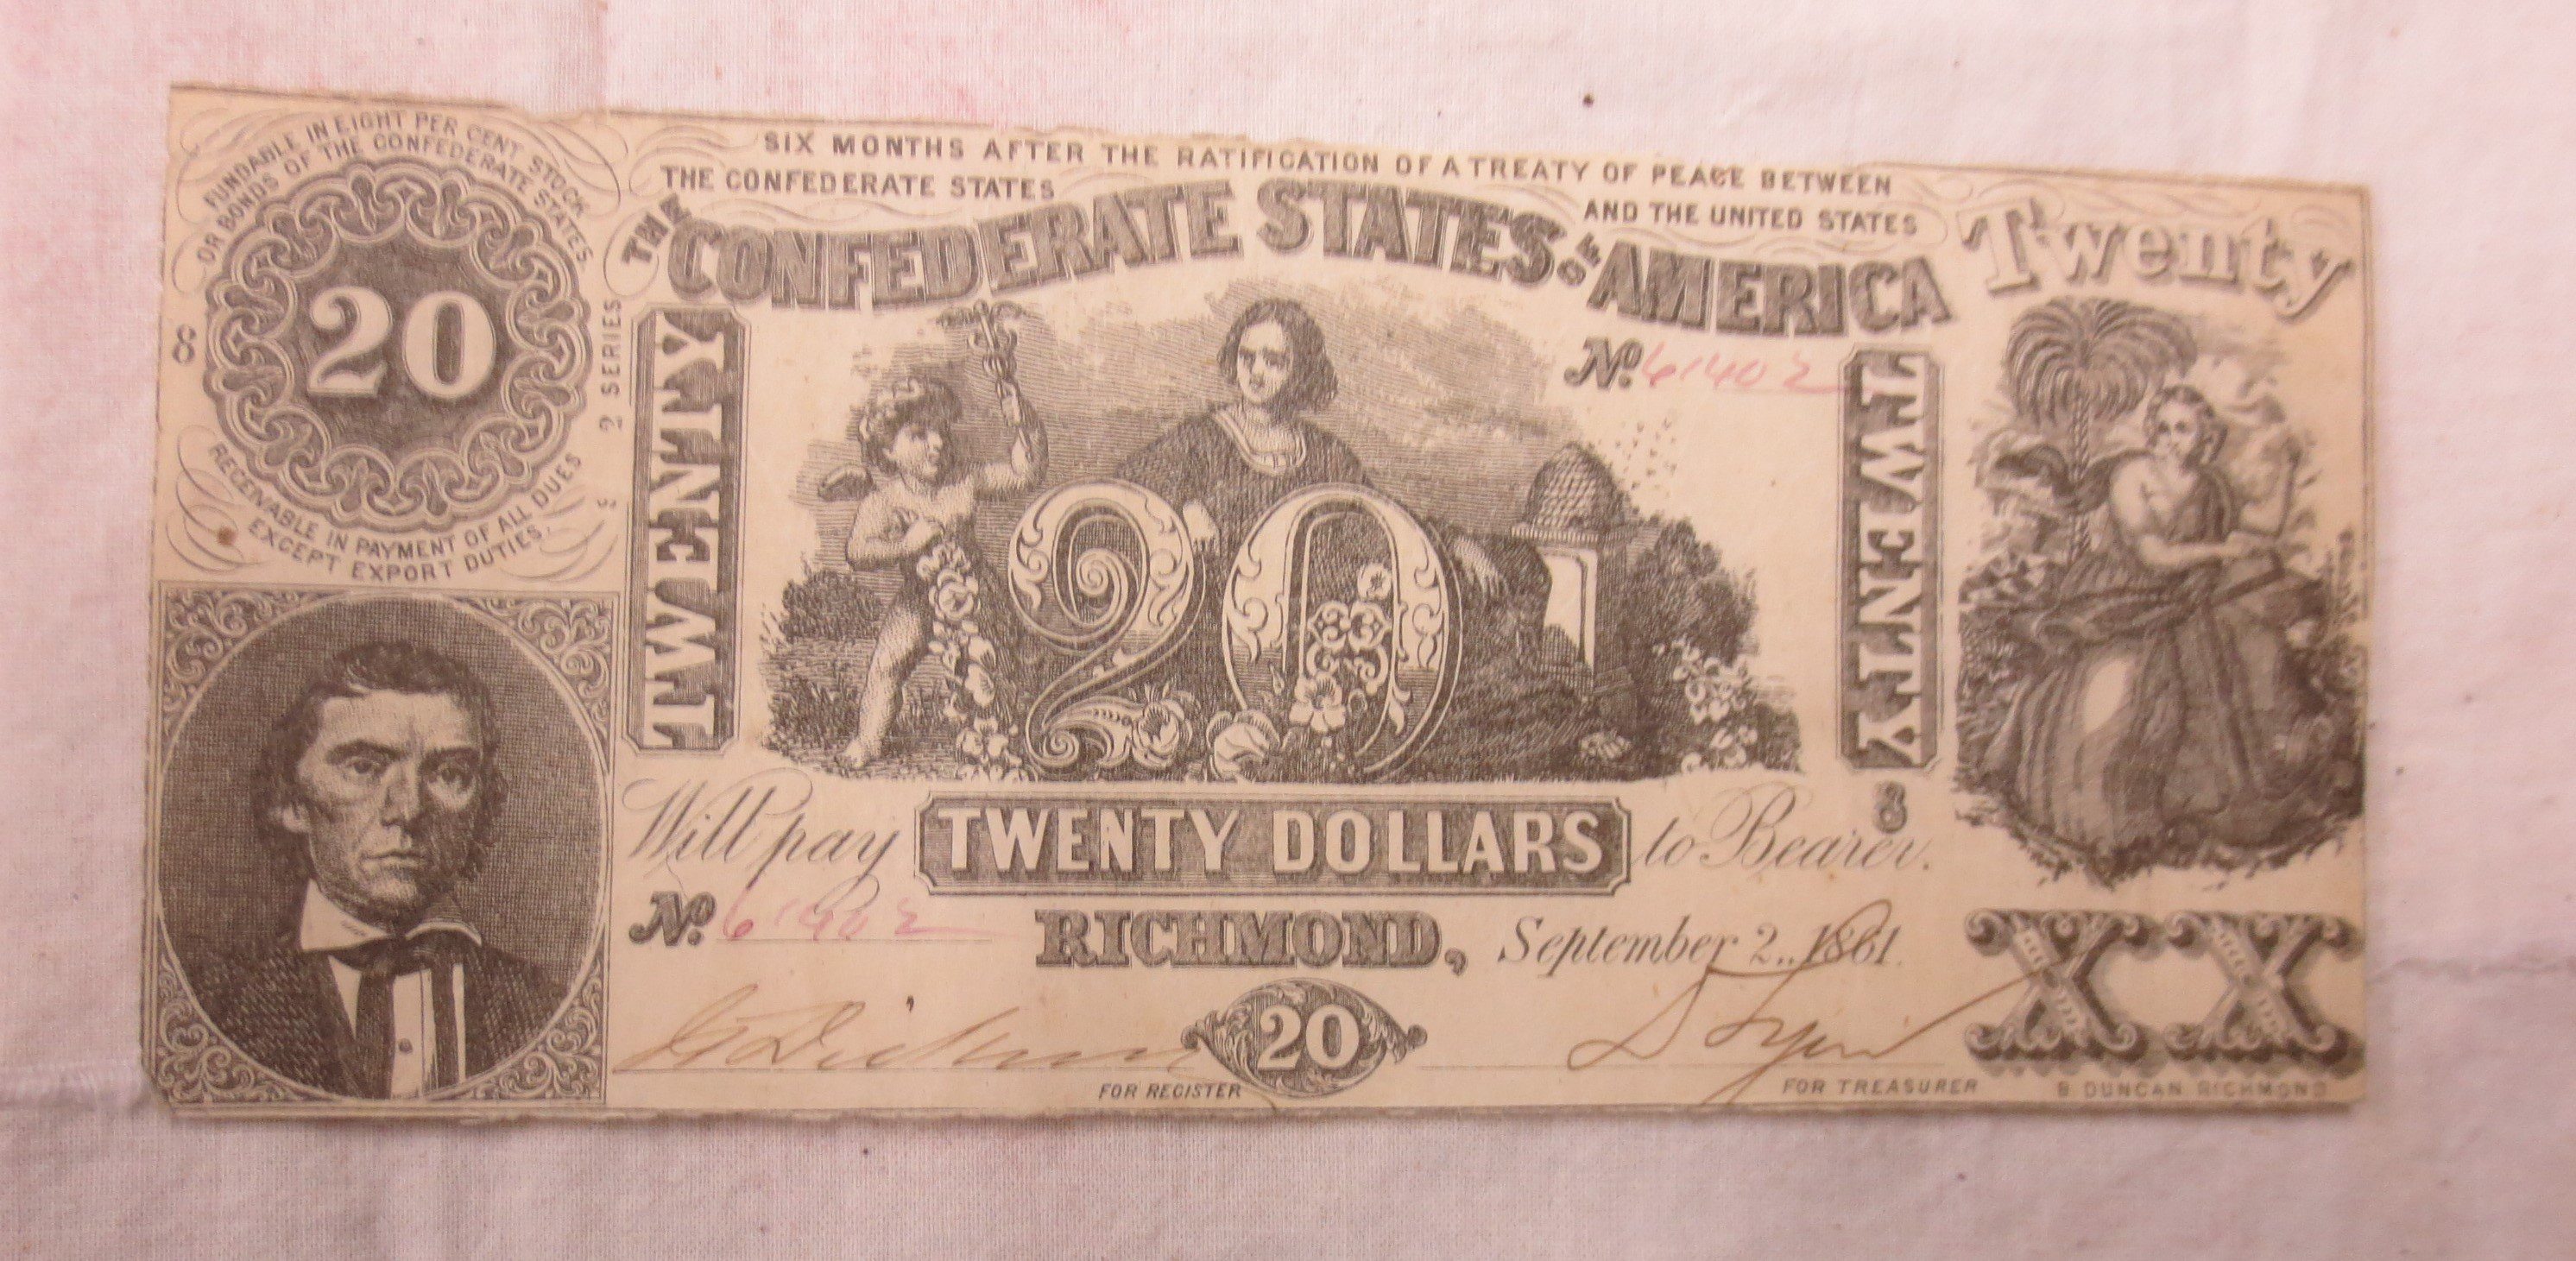 Back portion of the currency